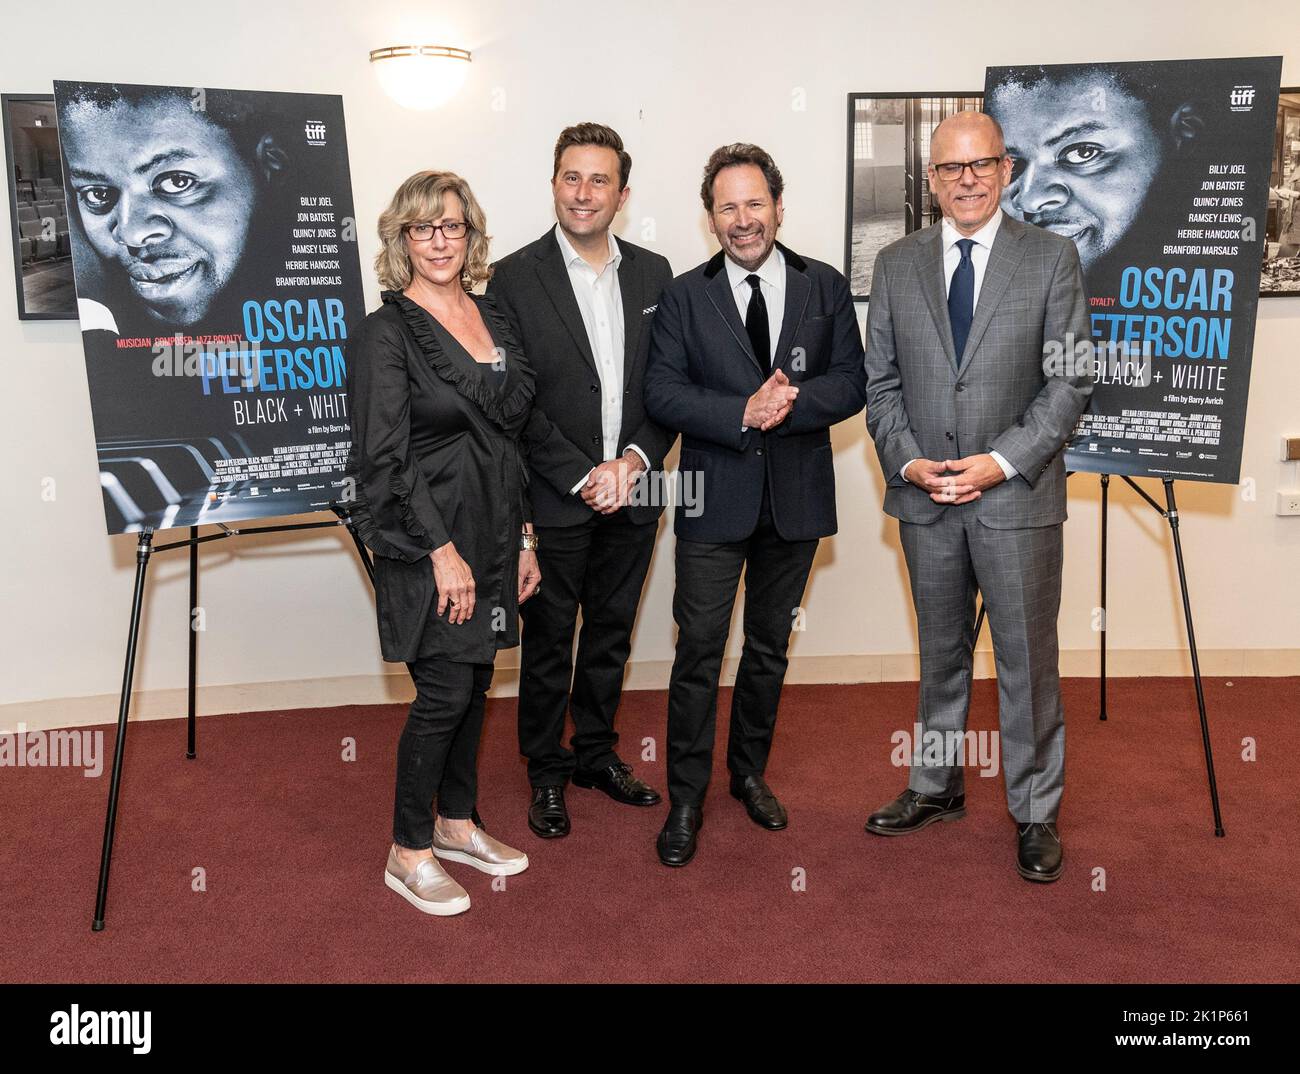 New York, NY - September 19, 2022: Catherine Scheinman, Mark Selby, Barry Avrich, Andre Frenette attend special screening of Oscar Peterson: Black + White at DGA New York Theater Stock Photo